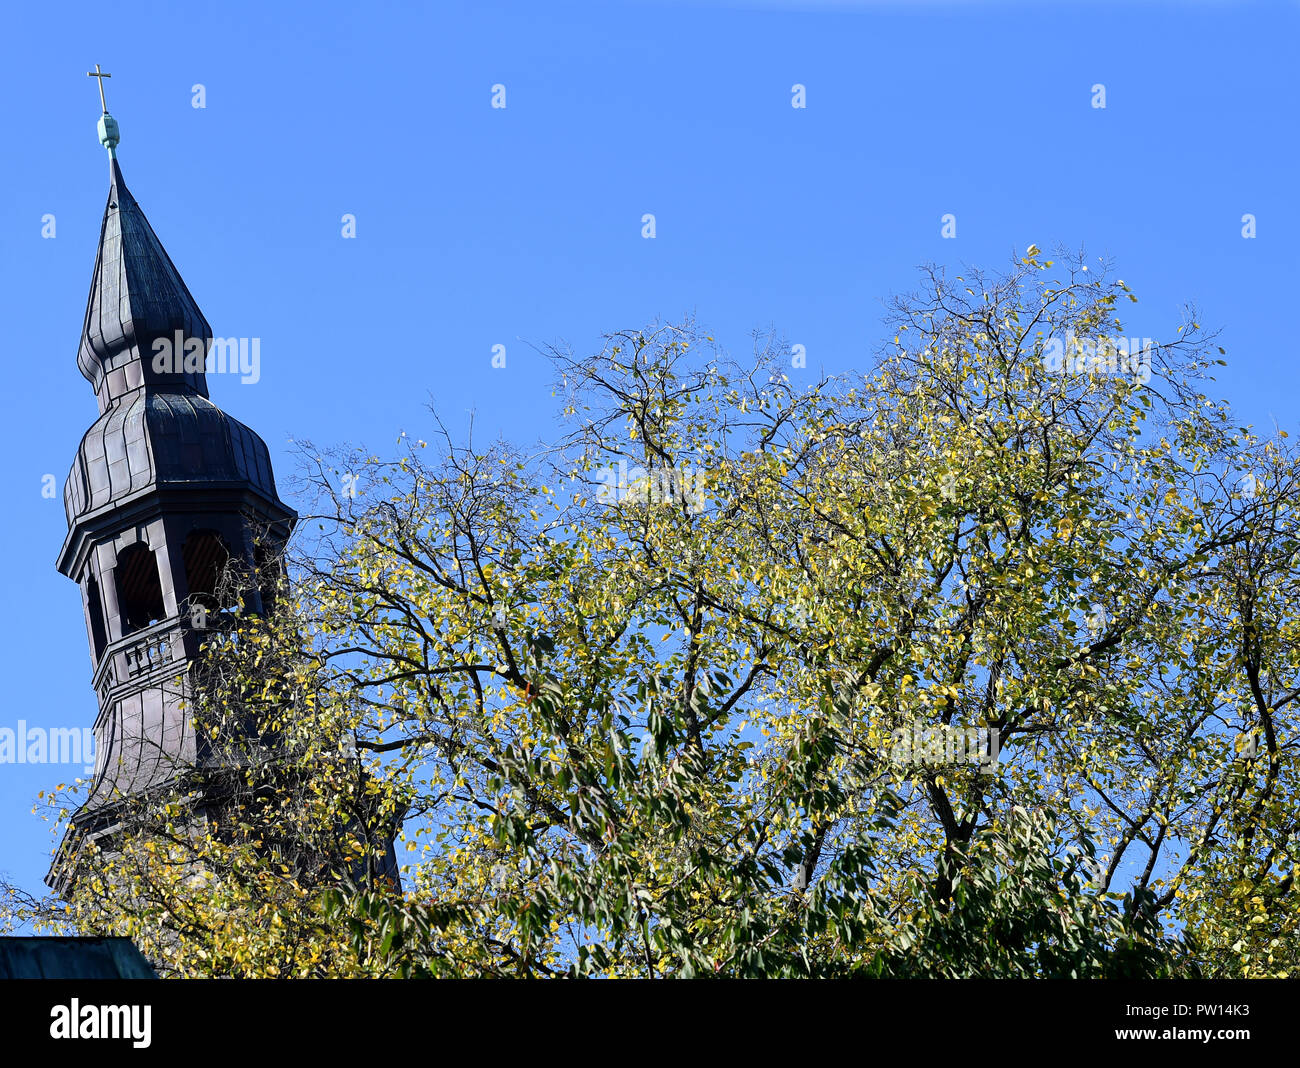 Hanover, Lower Saxony. 11th Oct, 2018. The tower of the Protestant-Lutheran Neustädter Hof- und Stadtkirche St. Johannis in the Hanoverian district of Calenberger Neustadt stands next to an autumnal deciduous tree. Credit: Holger Hollemann/dpa/Alamy Live News Stock Photo